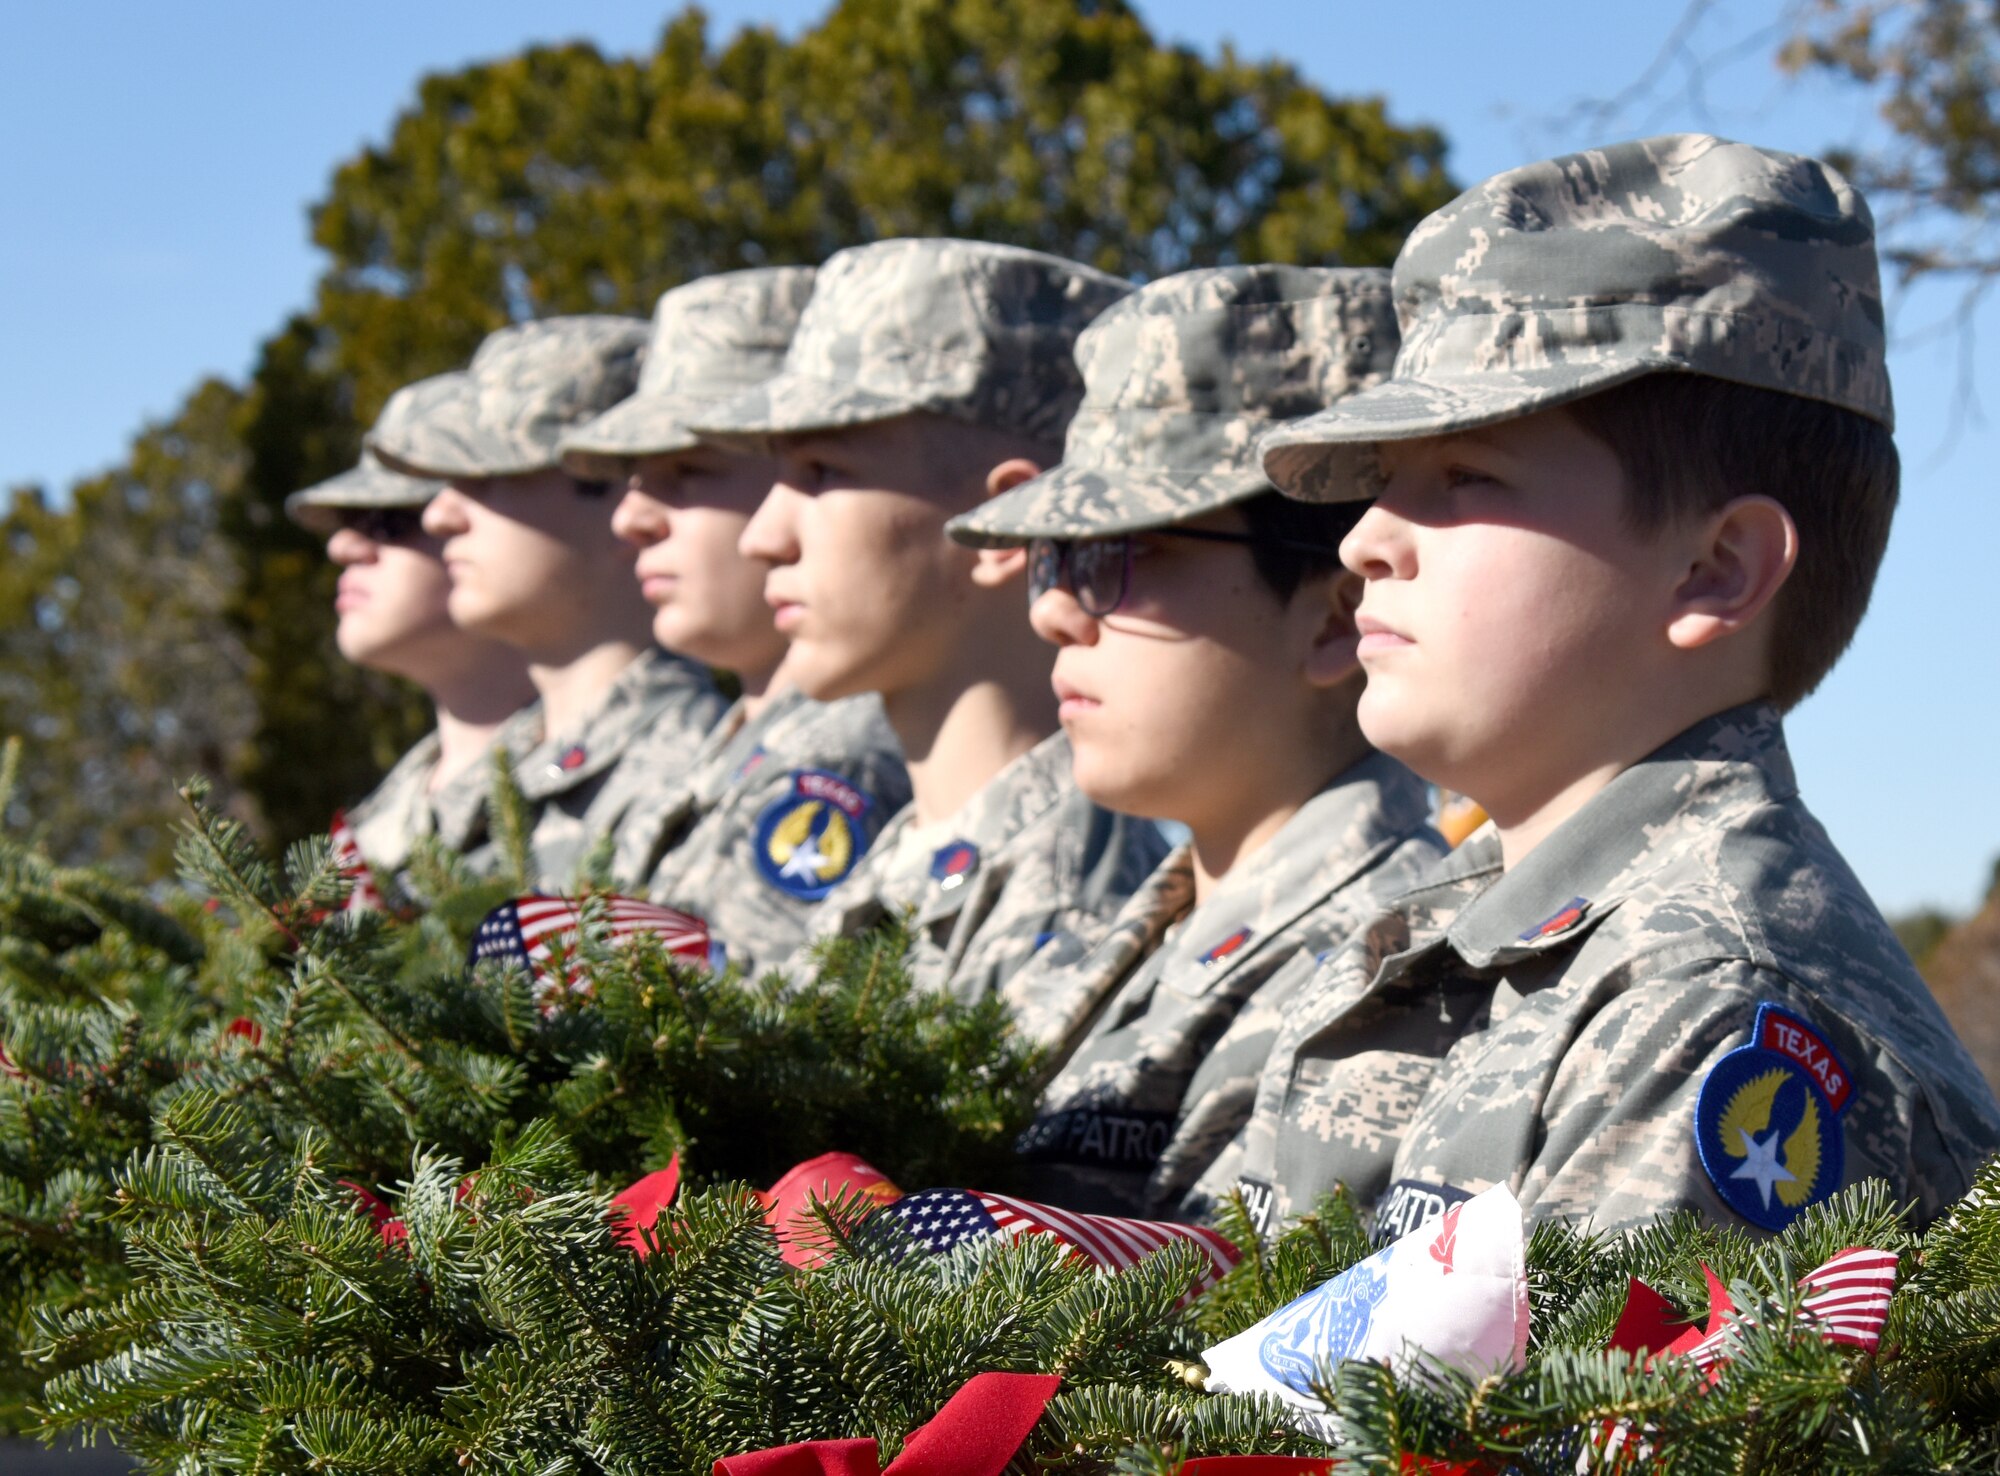 Members from the Civil Air Patrol San Angelo Composite Squadron prepare to hand out wreaths to members from Goodfellow during the Wreaths Across America event held at Belvedere Memorial Cemetery, San Angelo, Texas, Dec. 15, 2018. The San Angelo Composite Squadron has been hosting this event for 13 years. (U.S. Air Force photo by Airman 1st Class Seraiah Hines/Released)